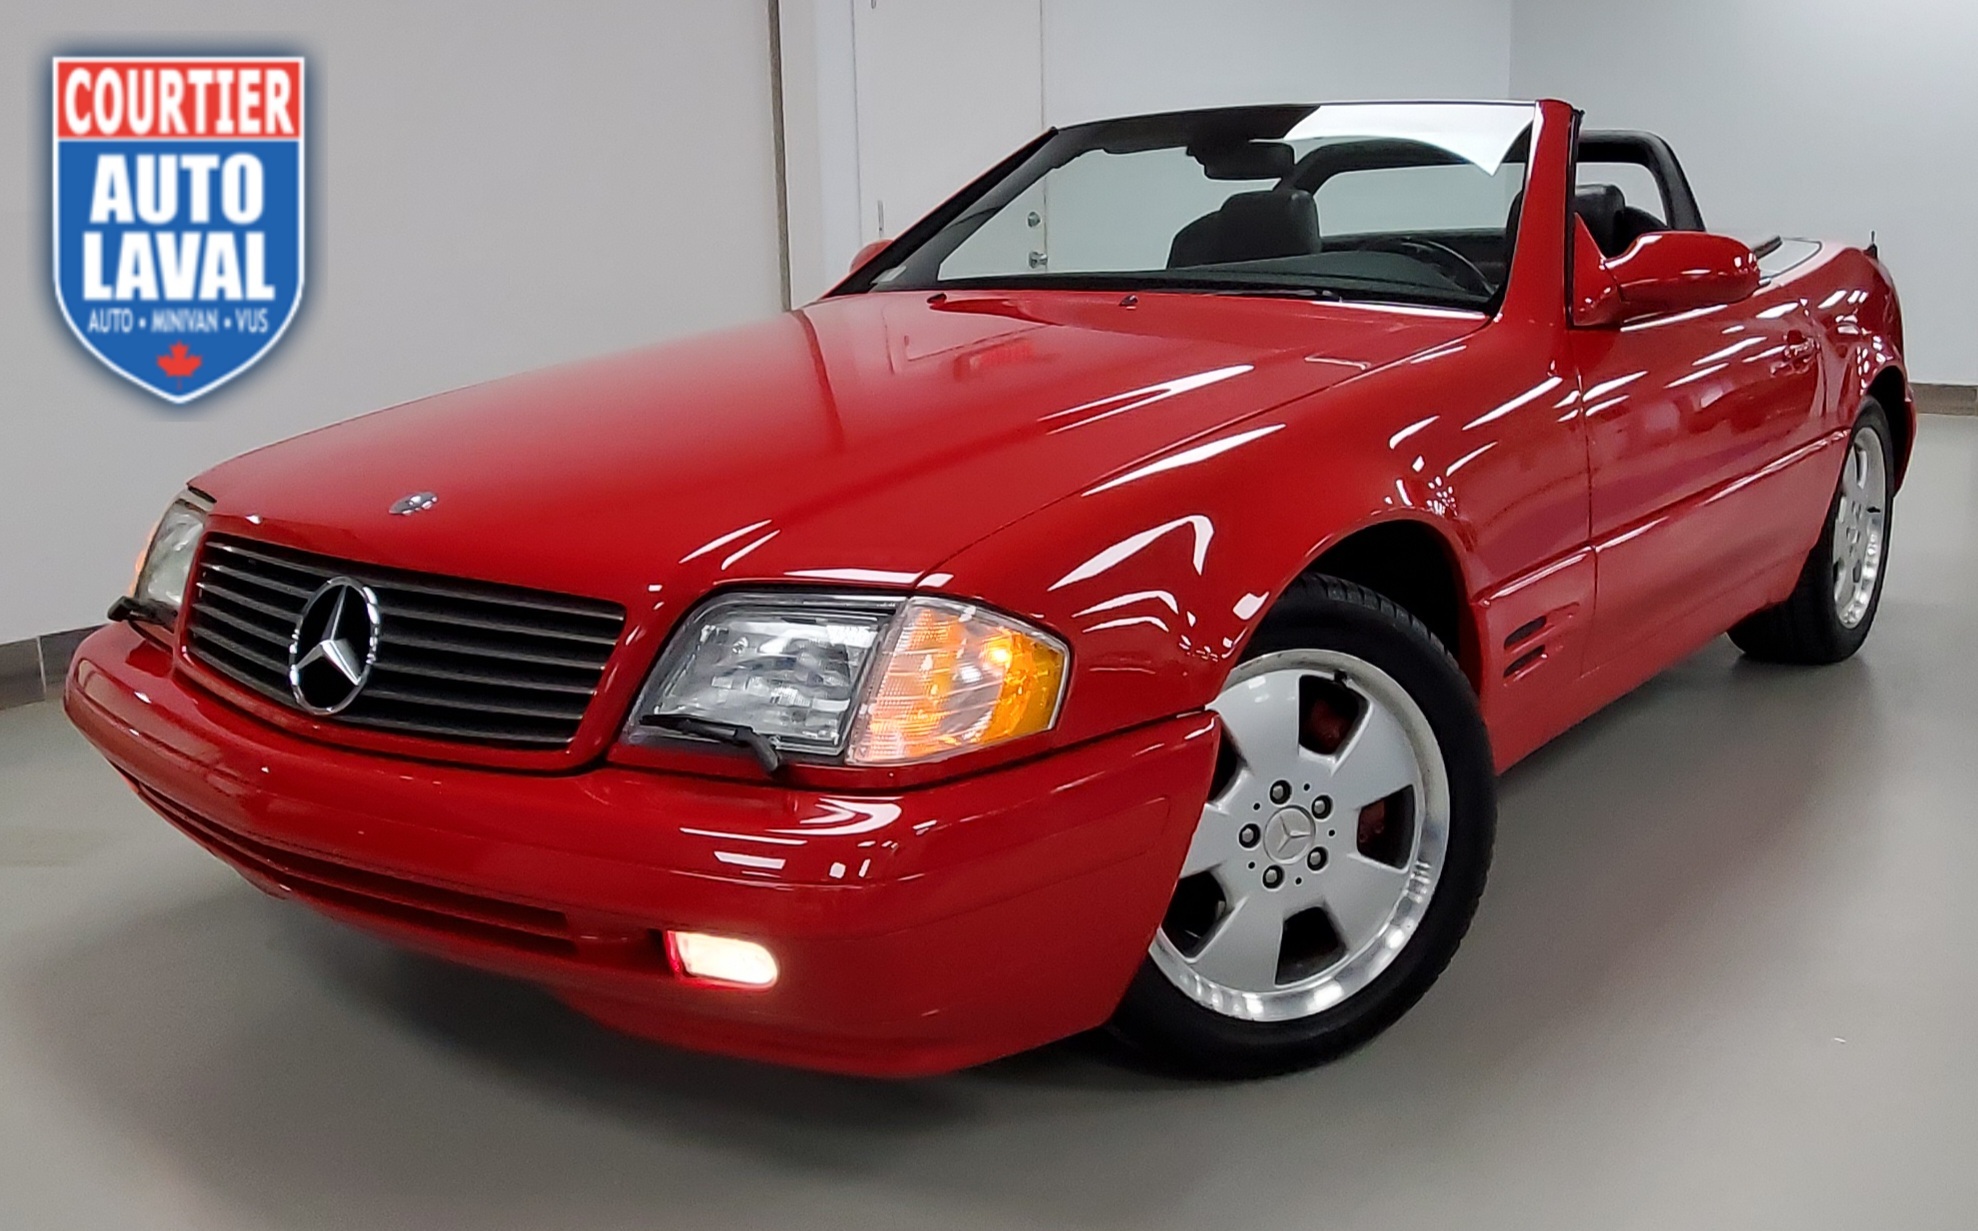 2000 Mercedes-Benz SL-Class ROADSTER - V8 5.0L - MAGMA RED! - LOW KM!